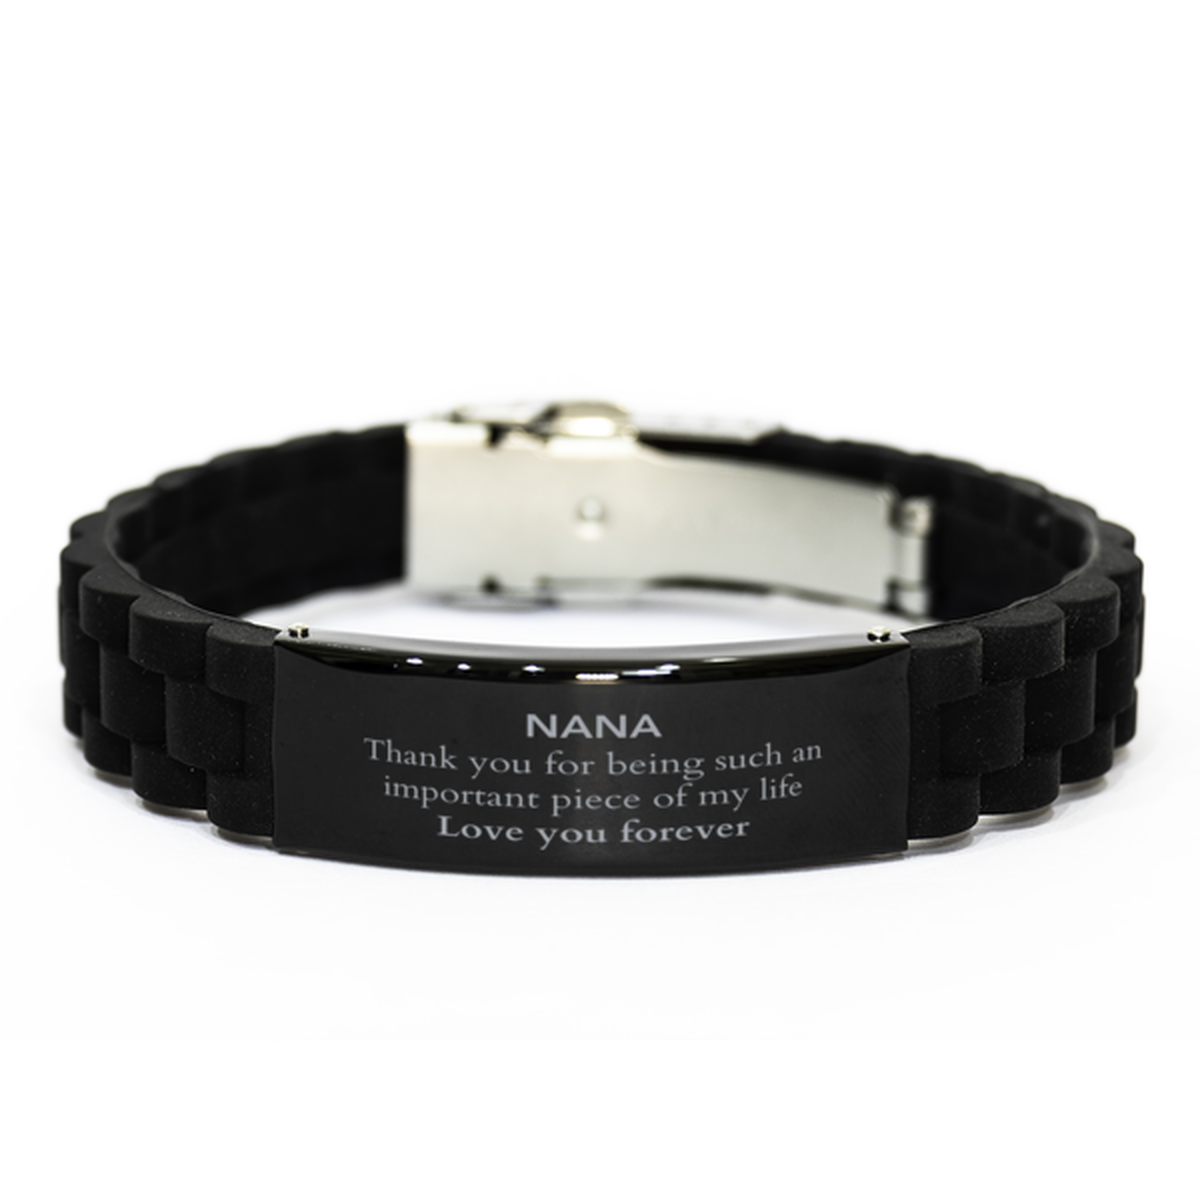 Appropriate Nana Black Glidelock Clasp Bracelet Epic Birthday Gifts for Nana Thank you for being such an important piece of my life Nana Christmas Mothers Fathers Day